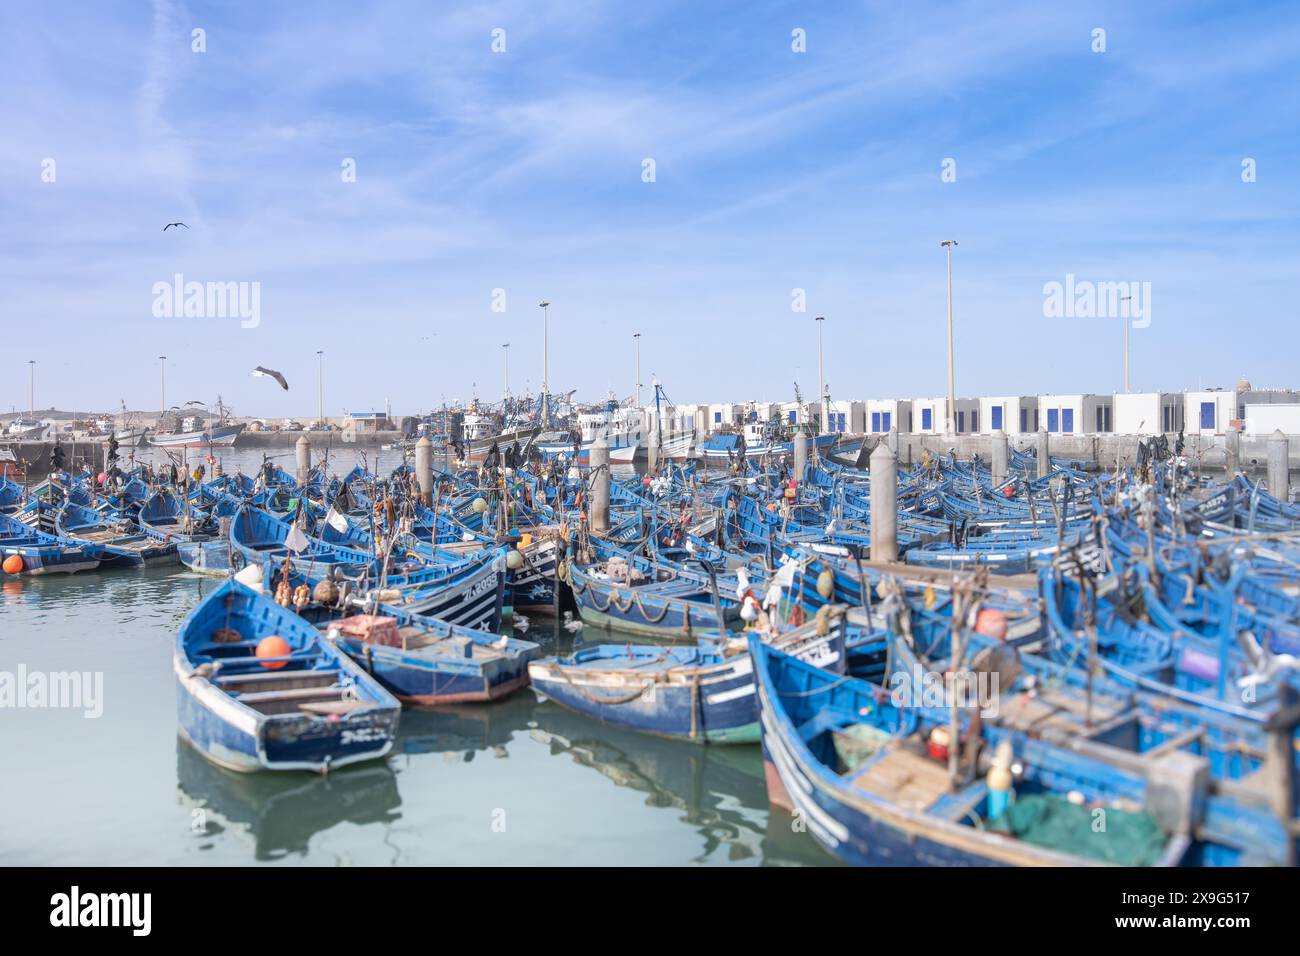 Many blue fishing boats anchored on the tranquil waters under clear skies. This is the traditional maritime culture of Essaouira, Morocco. Stock Photo